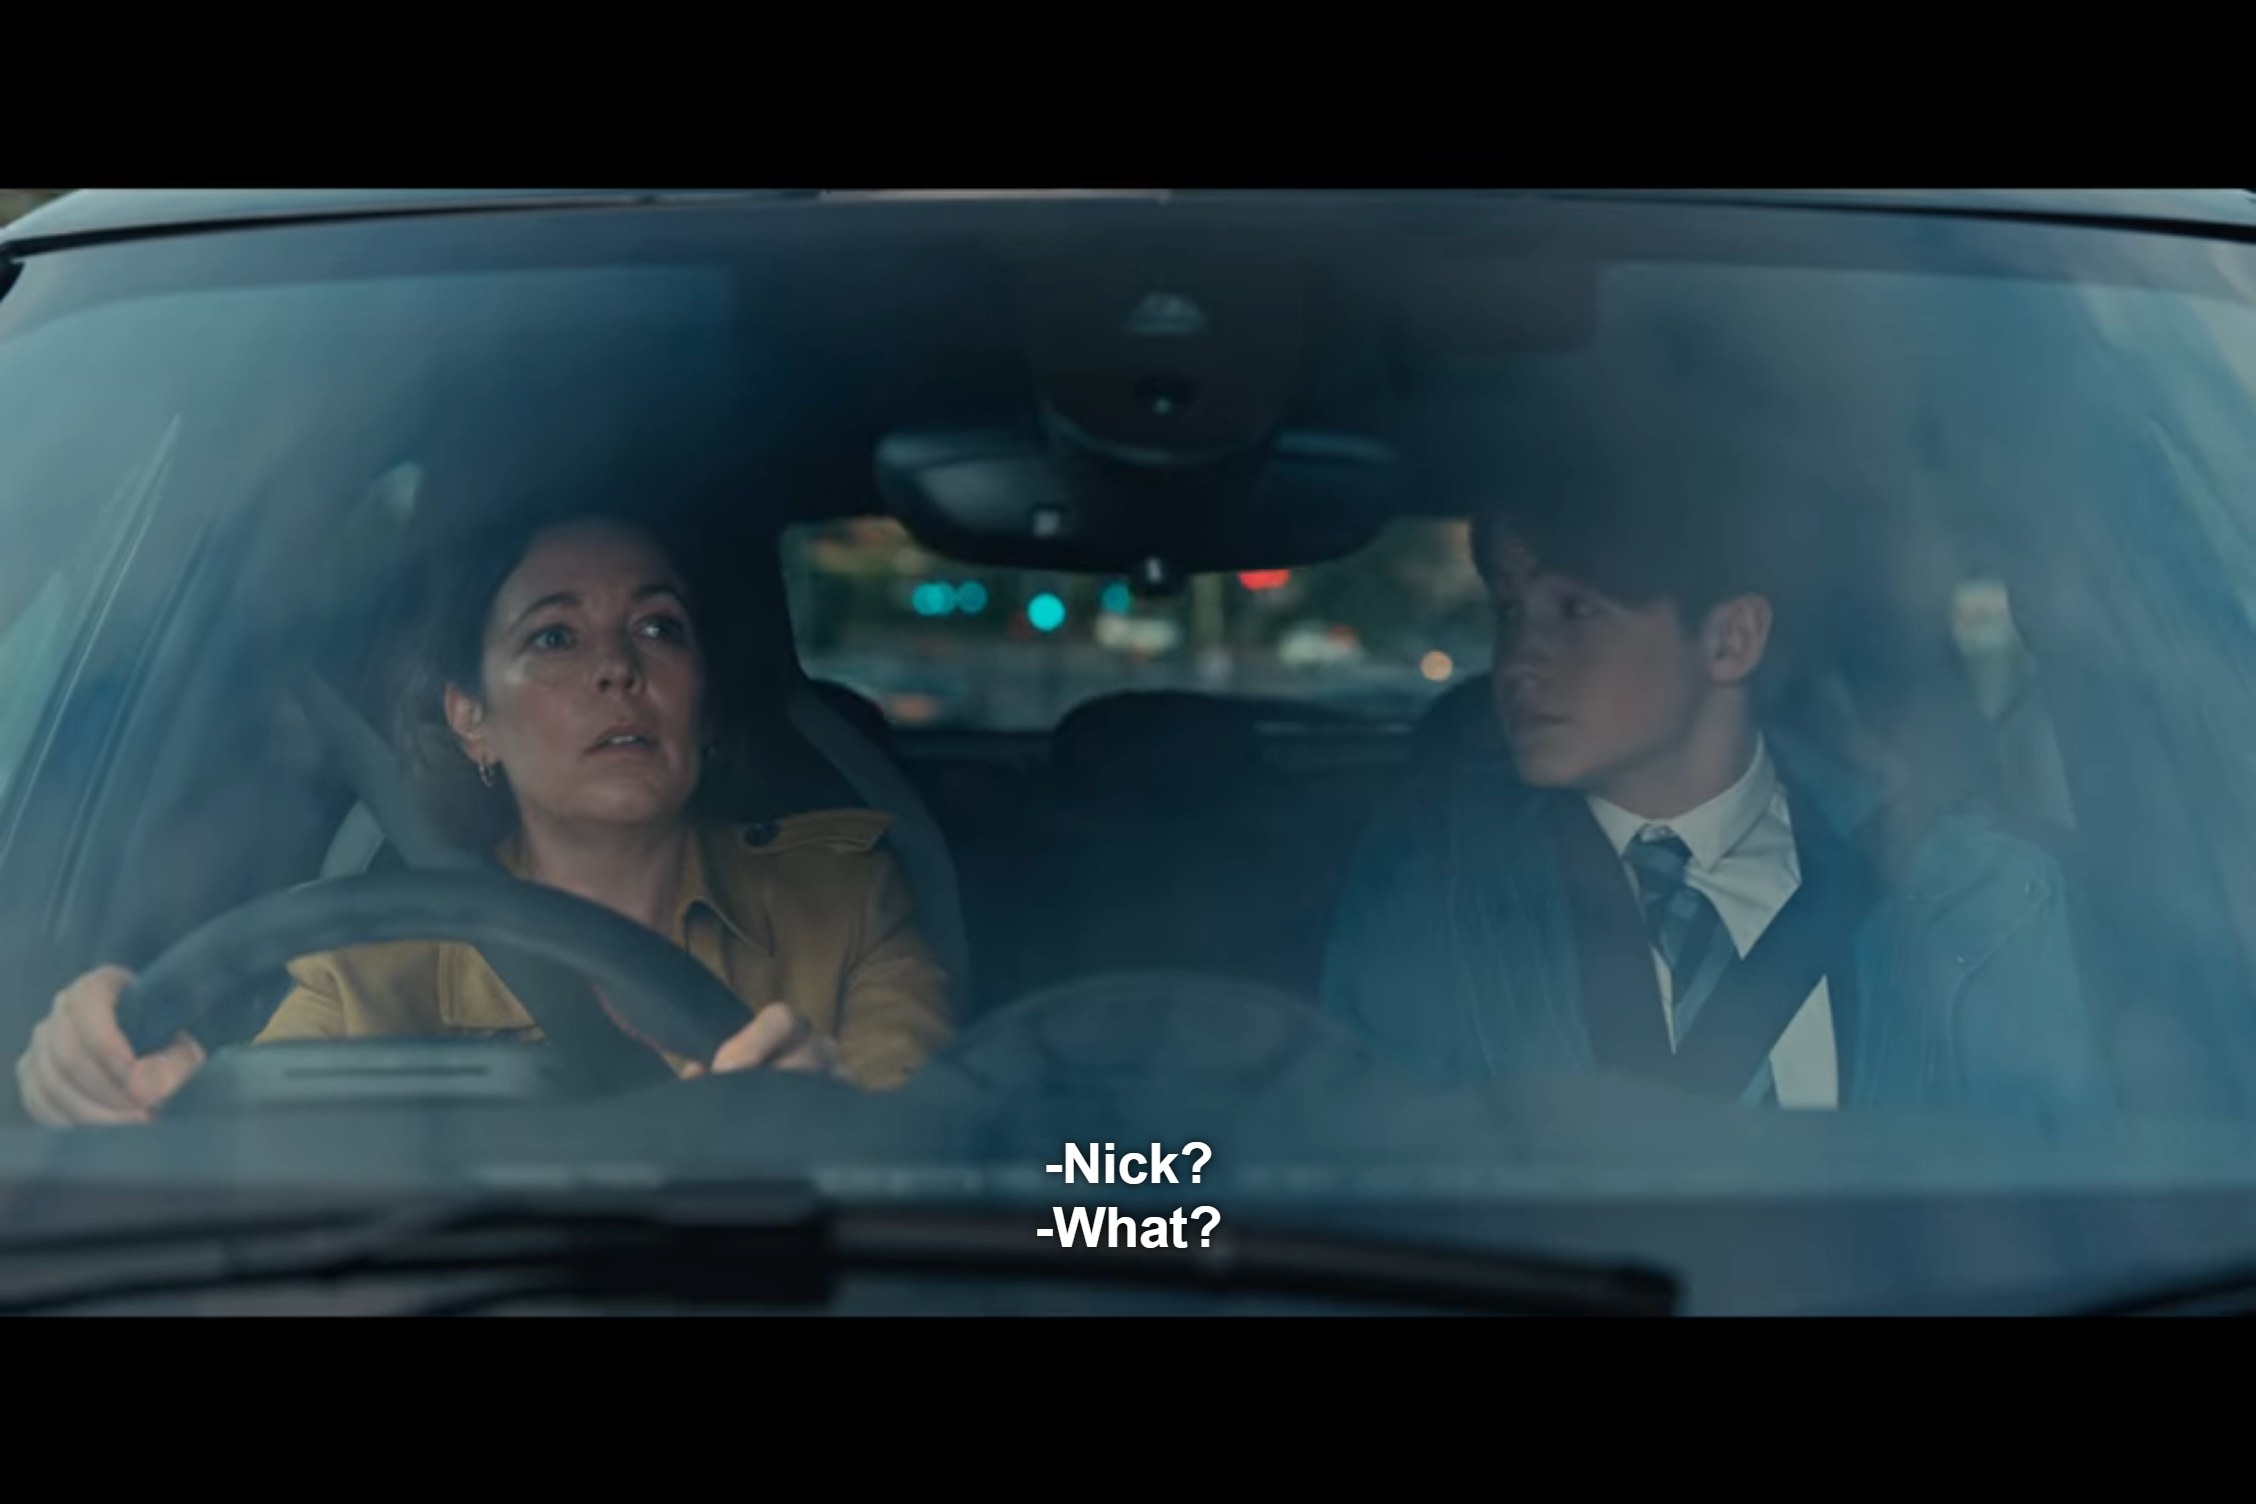 Sarah sits in the driver&#x27;s side of the car and says, &quot;Nick?&quot; while Nick looks on and asks, &quot;What?&quot;